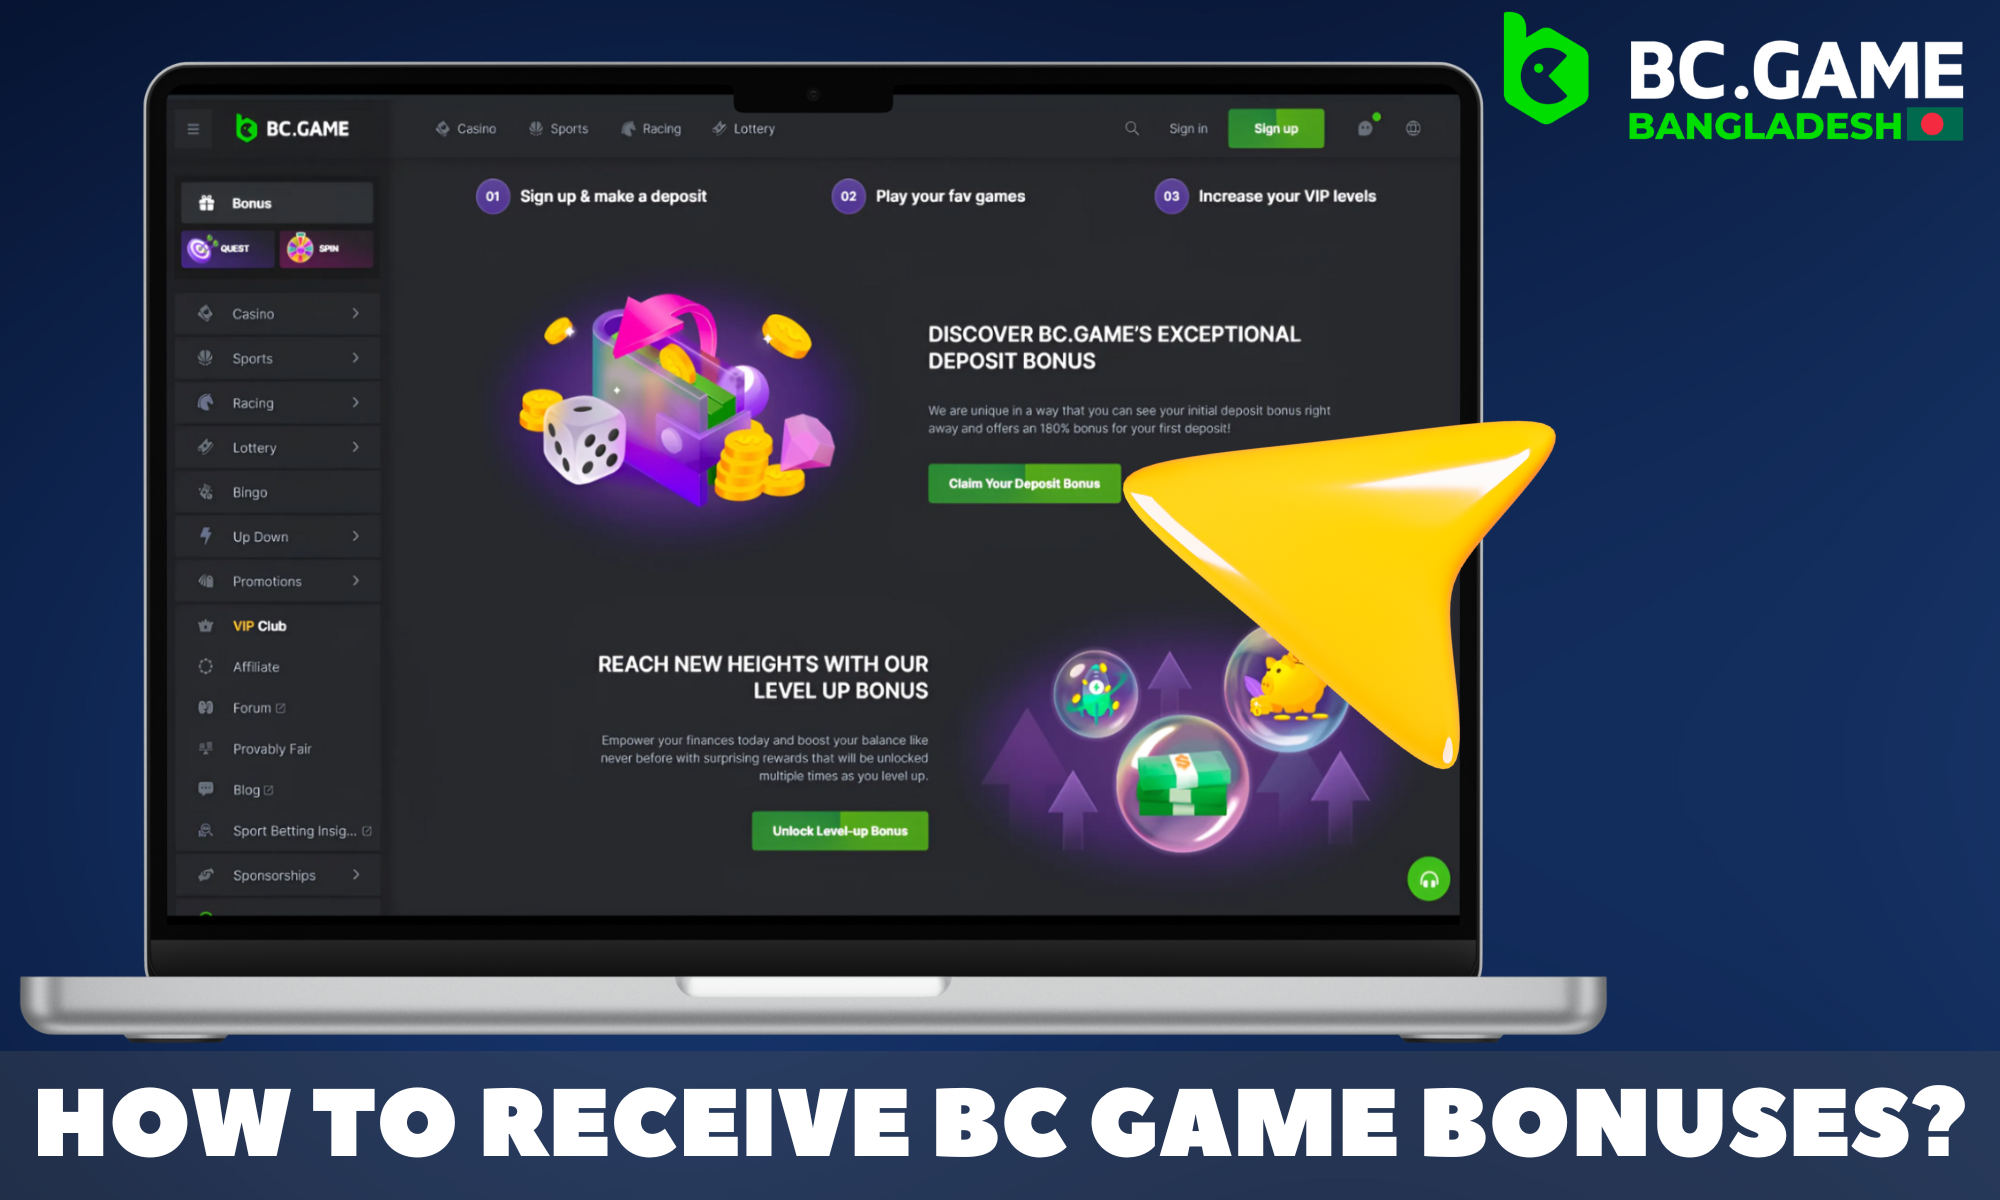 Step-by-step instructions on how to get a bonus from BC Game